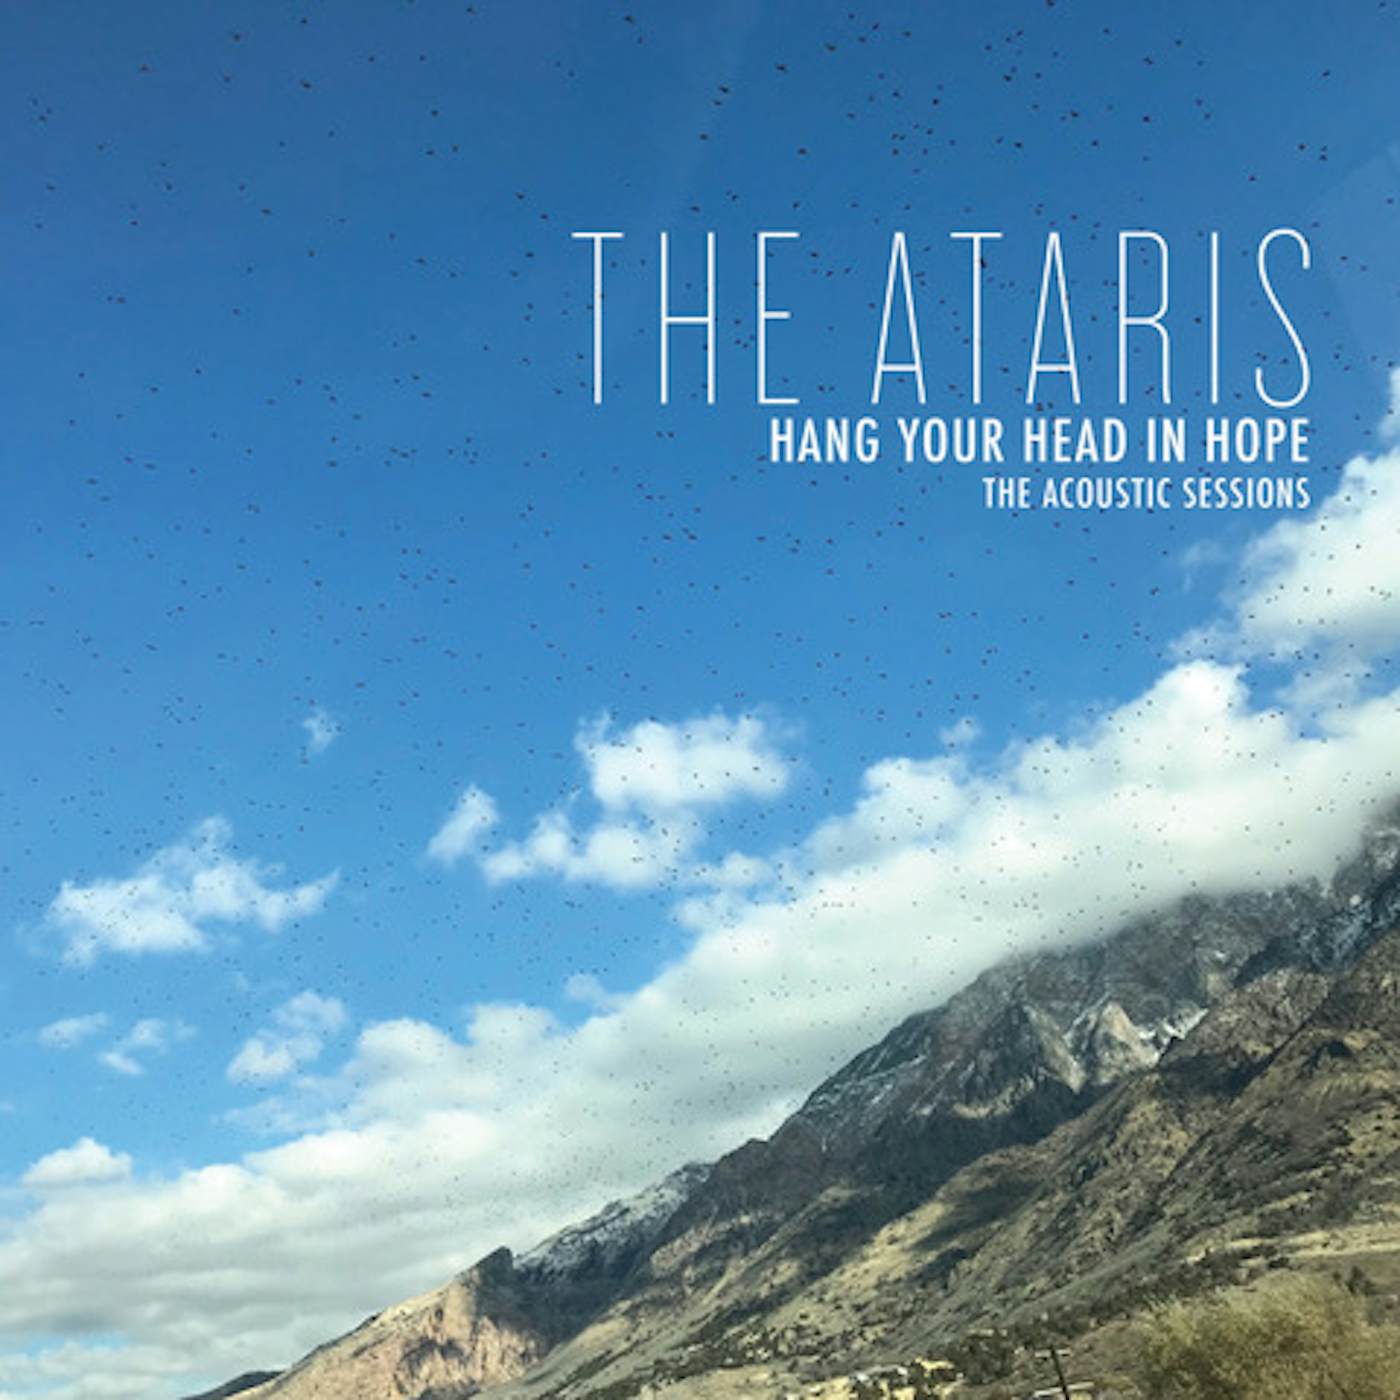 The Ataris HANG YOUR HEAD IN HOPE - THE ACOUSTIC SESSIONS Vinyl Record